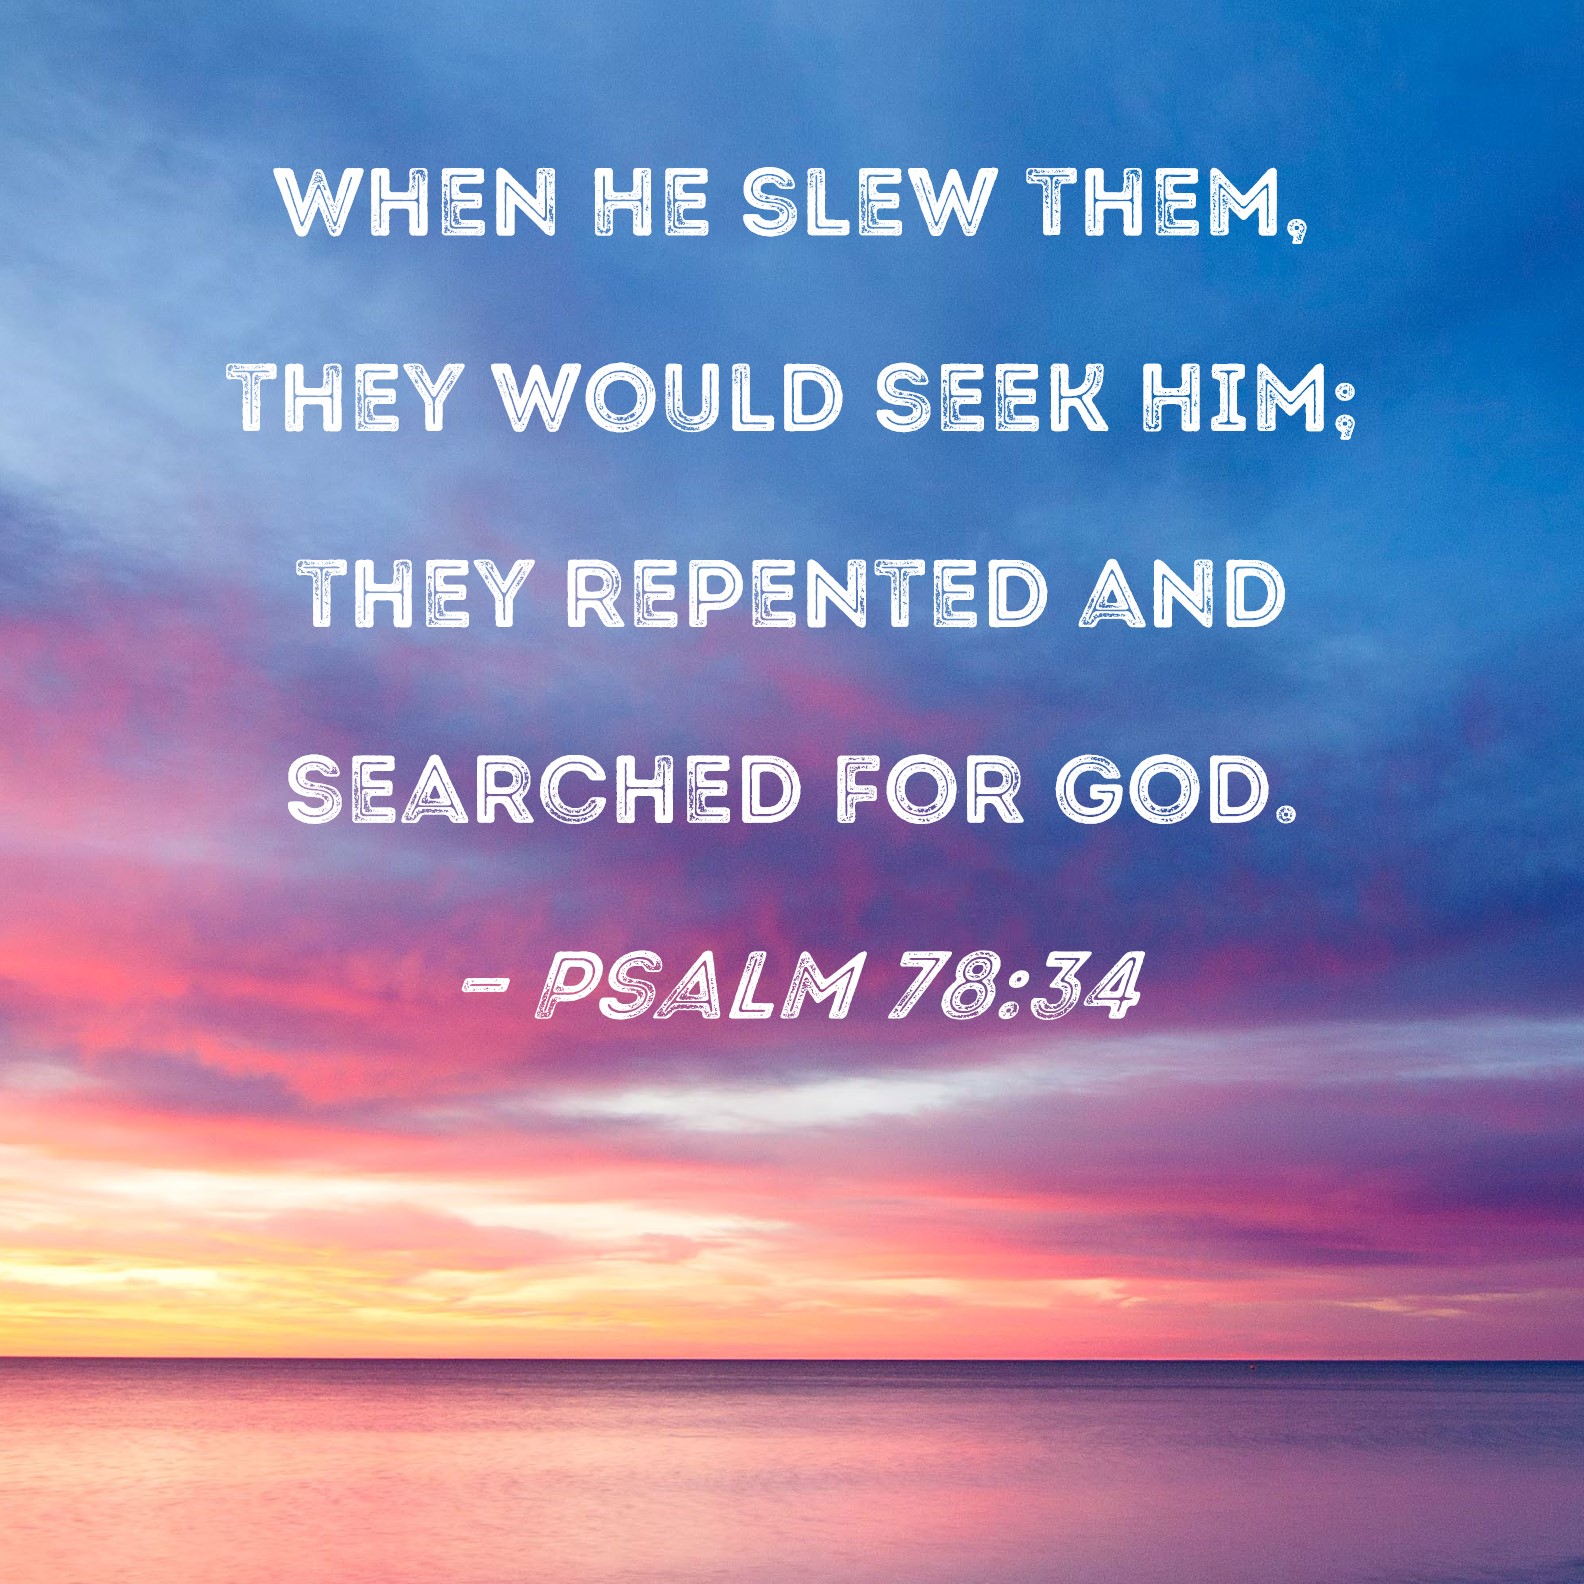 Psalm 78:34 When He slew them, they would seek Him; they repented and ...